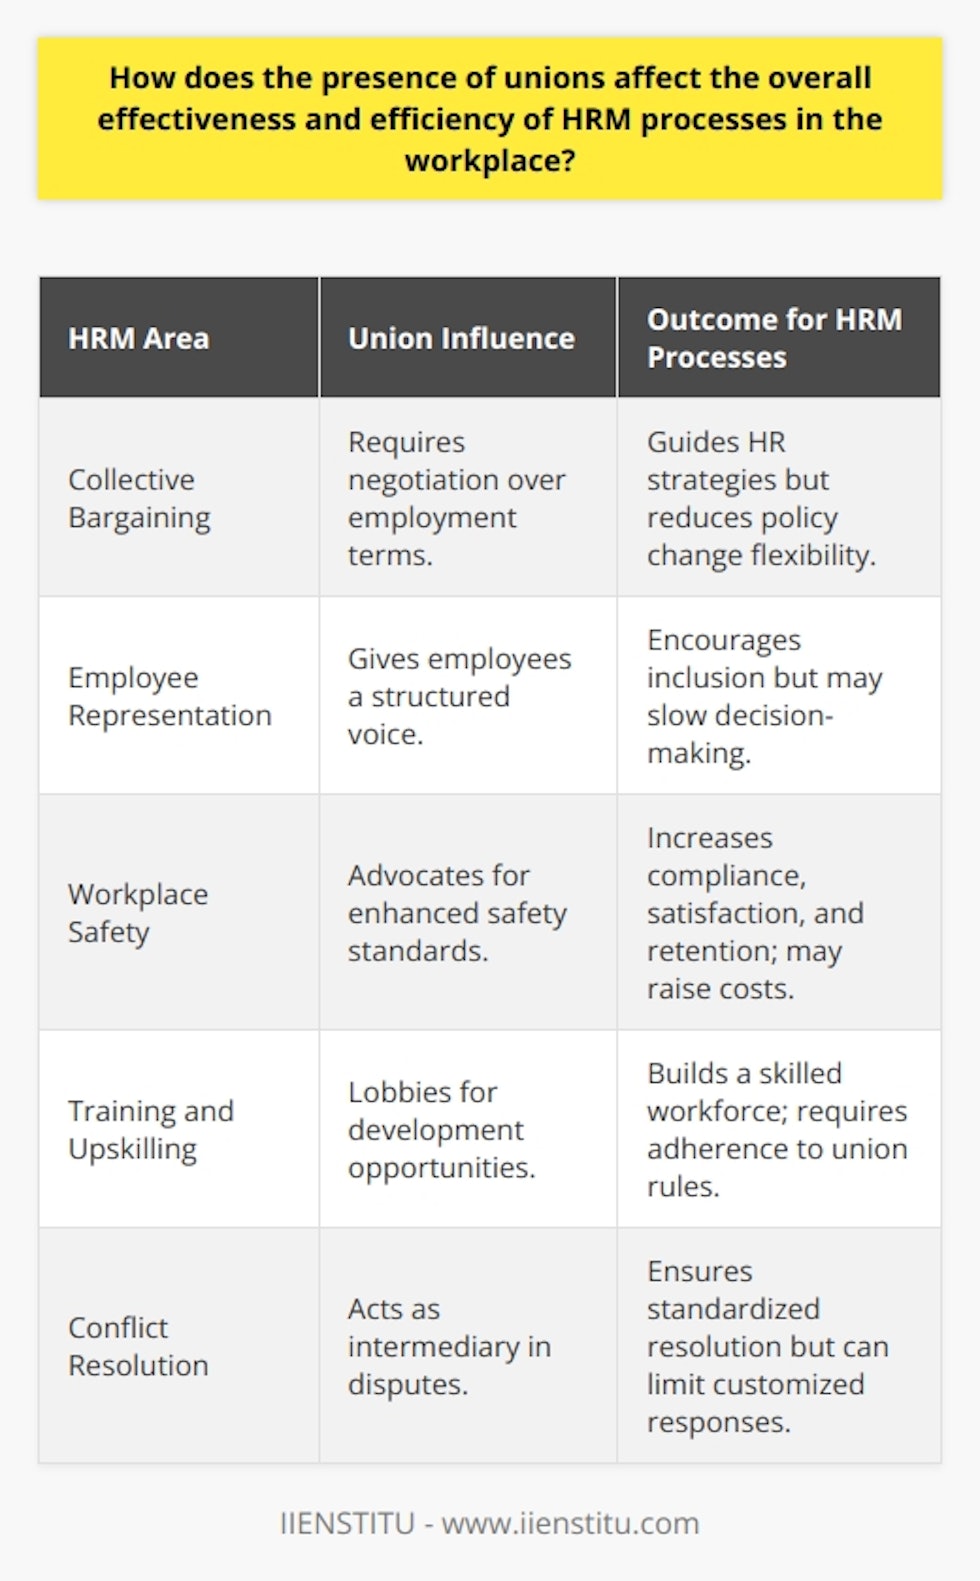 The impact of unions on human resource management (HRM) processes is multifaceted and dynamic, shaping the way in which organizations manage their workforce. Understanding this influence is critical for HR professionals to navigate the complexities of labor relations and to ensure an efficient and effective workplace.Collective Bargaining and HRM StrategyOne of the most evident ways in which unions affect HRM is through collective bargaining. Unions represent employees in negotiations over wages, hours, benefits, and working conditions. These negotiations lead HR to develop strategies that align with both organizational goals and employees' expectations. Even though collective bargaining can ensure fair treatment, it may also limit HR's flexibility in making swift changes to policies or practices because any significant alterations should be negotiated with the union.Employee Representation and VoiceUnions reinforce the role of employees in the decision-making process, providing a platform for their voices to be heard. This can lead to improved HRM processes as it encourages the consideration of employee feedback in key decisions, fostering a more inclusive work environment. The presence of a union means HR must often engage in a continuous dialogue with employee representatives rather than with individual employees, which could prolong the decision-making process. However, this can also prevent minor issues from escalating into bigger problems, as employees feel their concerns are recognized and addressed.Workplace Safety and ComplianceSafety standards in the workplace are often heightened due to the advocacy of unions, encouraging stringent adherence to compliance regulations. Unions press for more rigorous enforcement of safety protocols, which indirectly benefits HRM by reducing the frequency of workplace accidents and the resulting costs. These enhanced safety measures contribute to higher employee satisfaction and retention, albeit potentially increasing the operational costs for the organization with the implementation of advanced safety programs.Training and UpskillingUnions frequently push for continuous training and upskilling opportunities for their members, resulting in HRM needing to invest in comprehensive employee development programs. This emphasis on professional growth aligns with the HR goal of building a more competent and competitive workforce. However, the stipulations surrounding these training programs are often dictated by collective agreements that may require HRM to navigate around union rules and job classifications.Resolution of Workplace ConflictsUnions serve as intermediaries in conflict resolution, which can impact the efficacy of HRM's role in managing workplace disputes. HR departments might have to adopt structured grievance procedures outlined by collective agreements, which could streamline the resolution process but also slow down the response time to individual concerns. The structured nature of this process ensures a standardized response to conflicts but might limit HR's ability to provide tailored solutions.In conclusion, the impact of unions on HRM processes is both significant and nuanced. Unions can enhance workplace equity, safety, and employee development, which aligns with sound HR practices. Nevertheless, the negotiation and compliance with union demands can also introduce complexities that HR must deftly manage. Thus, an effective HR department must balance the goals of the organization with the expectations of the unionized workforce, ultimately aiming to foster a cooperative and mutually beneficial relationship between the employer, the employees, and their representatives.